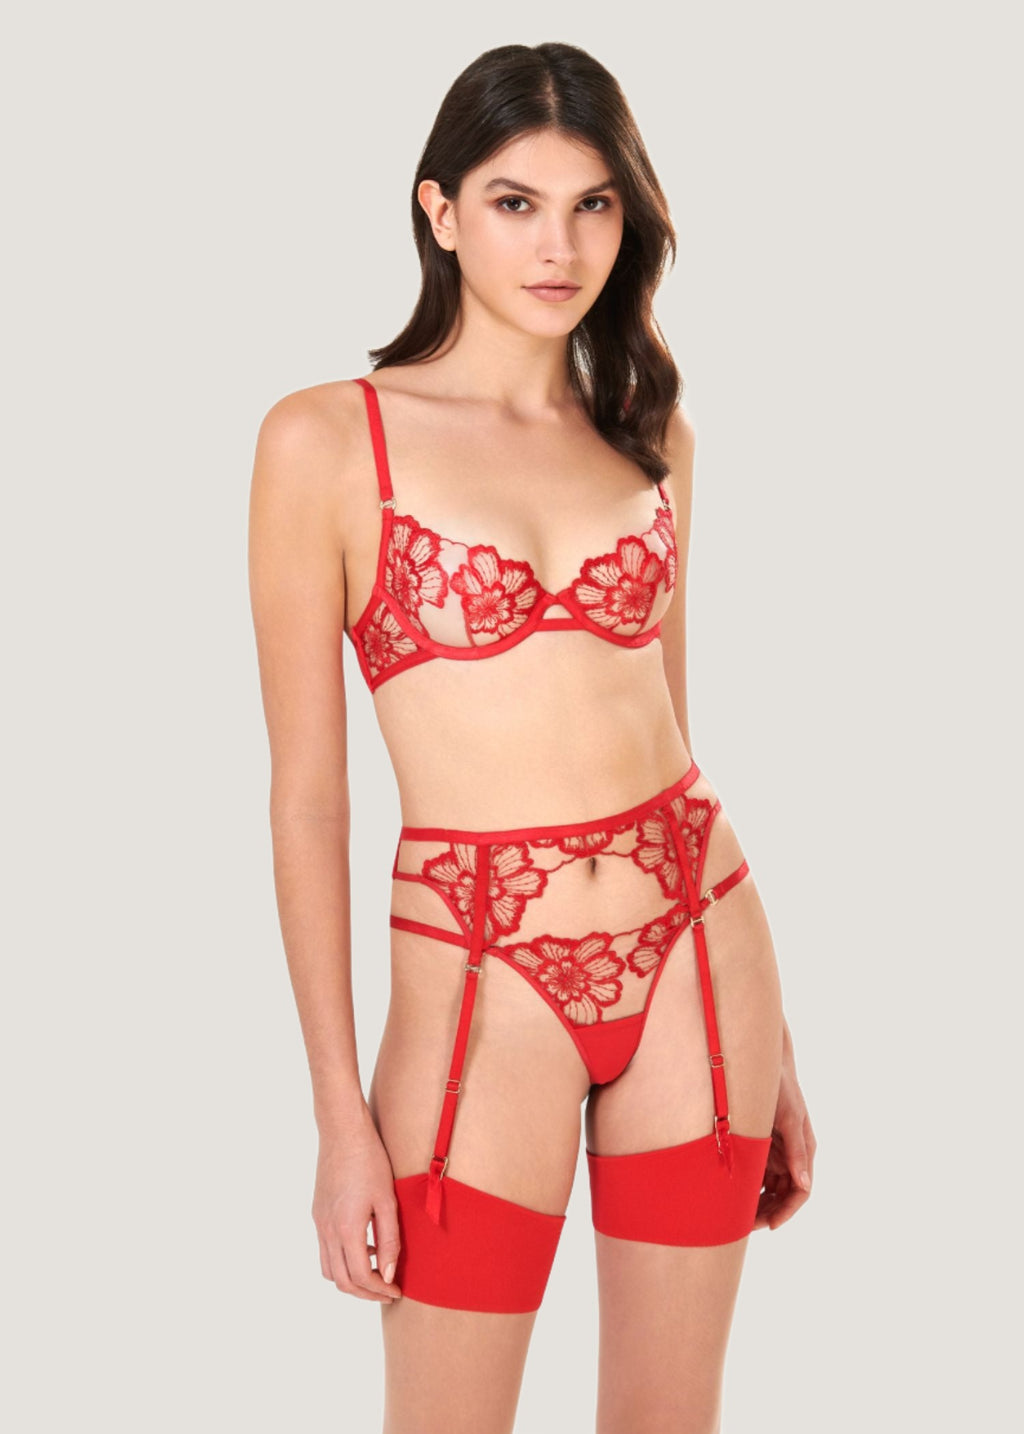 Bluebella Catalina delicate floral lace lingerie set in red